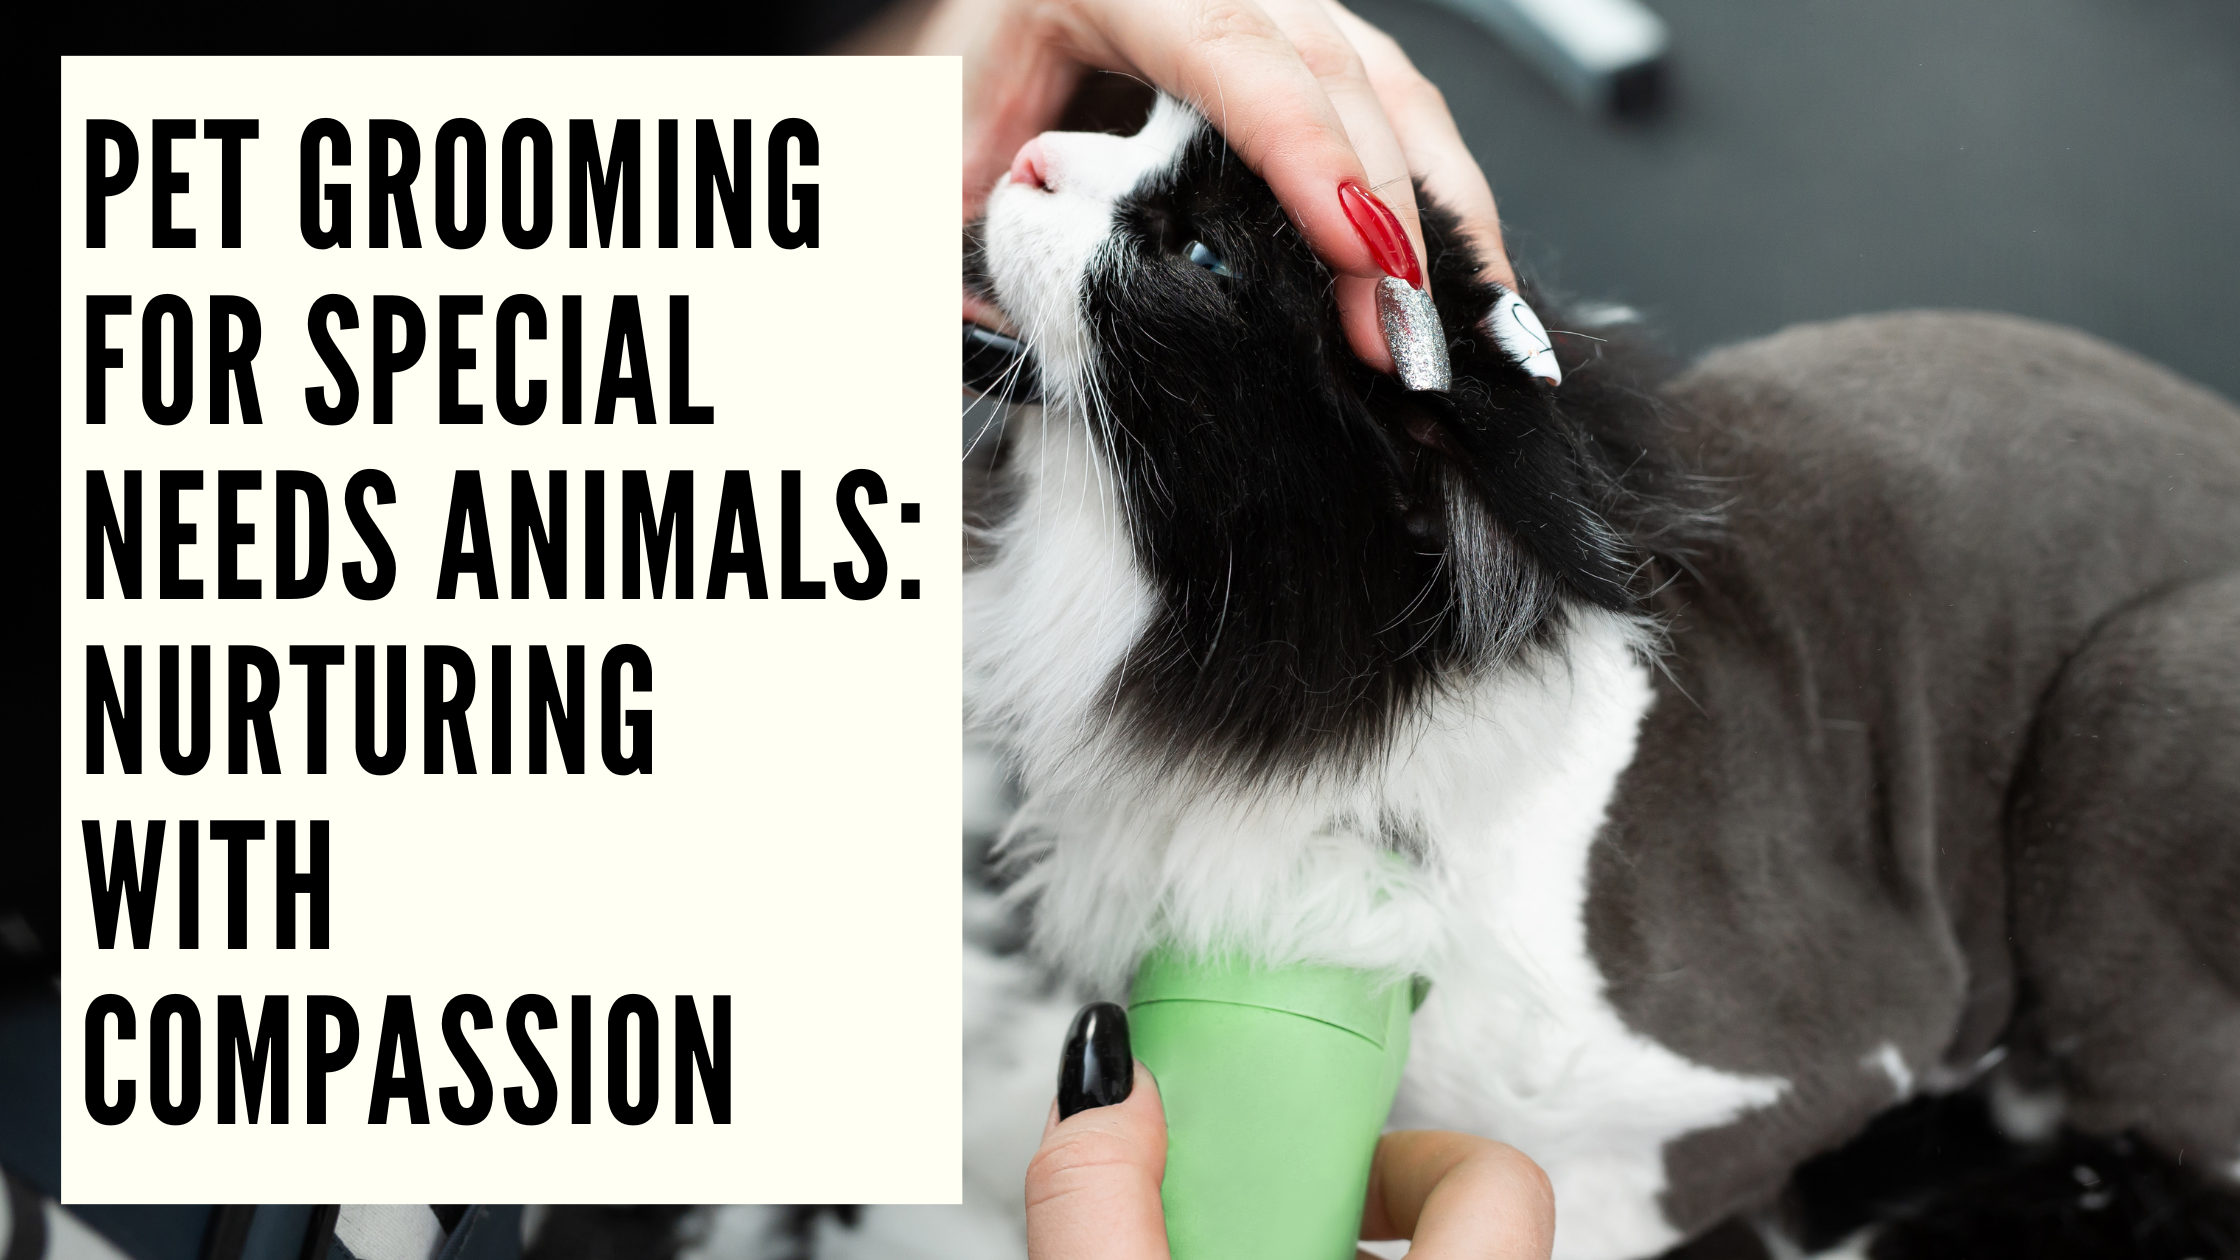 Pet Grooming for Special Needs Animals Nurturing with Compassion